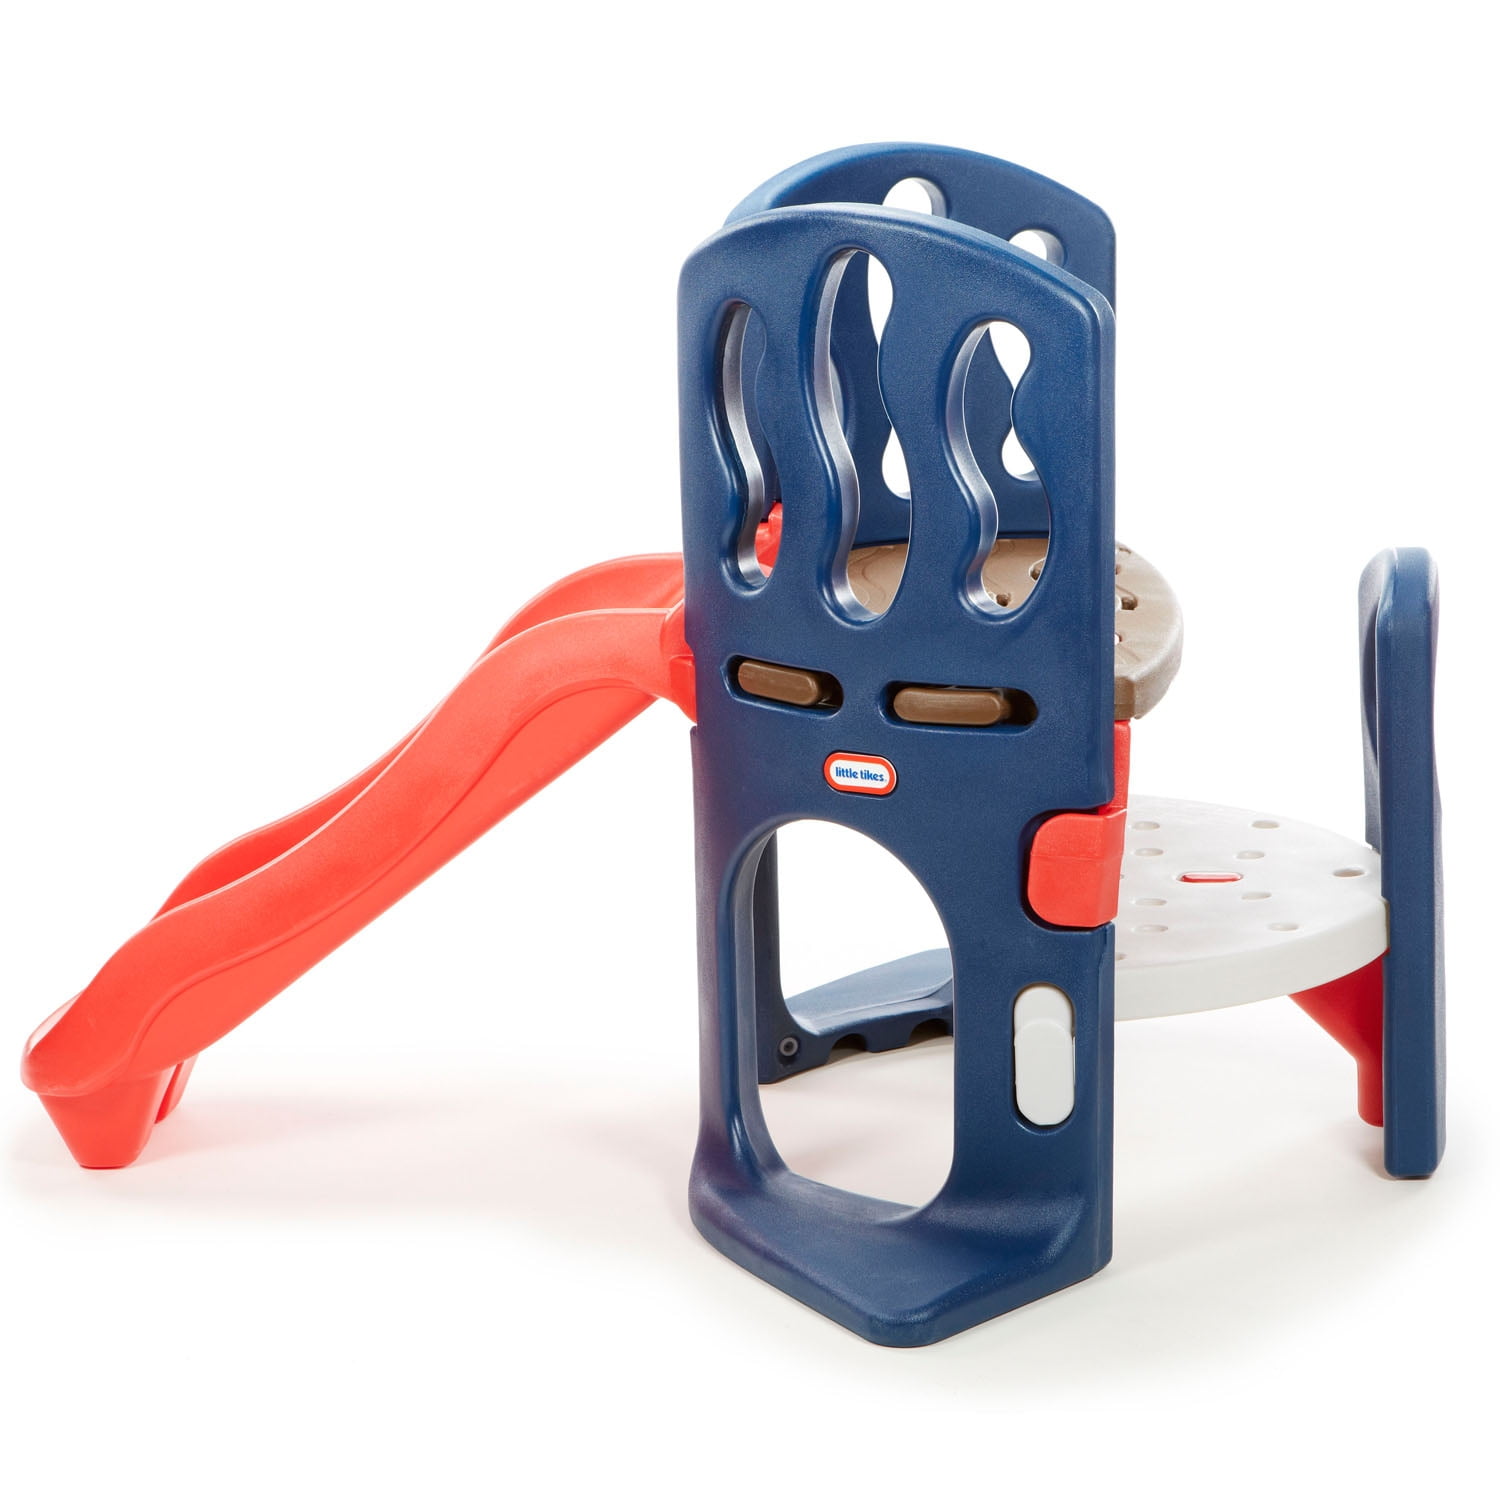 Little Tikes Hide & Slide Climber, Blue & Red - Climbing Toy and Slide for Kids Ages 2 to 6 - 3